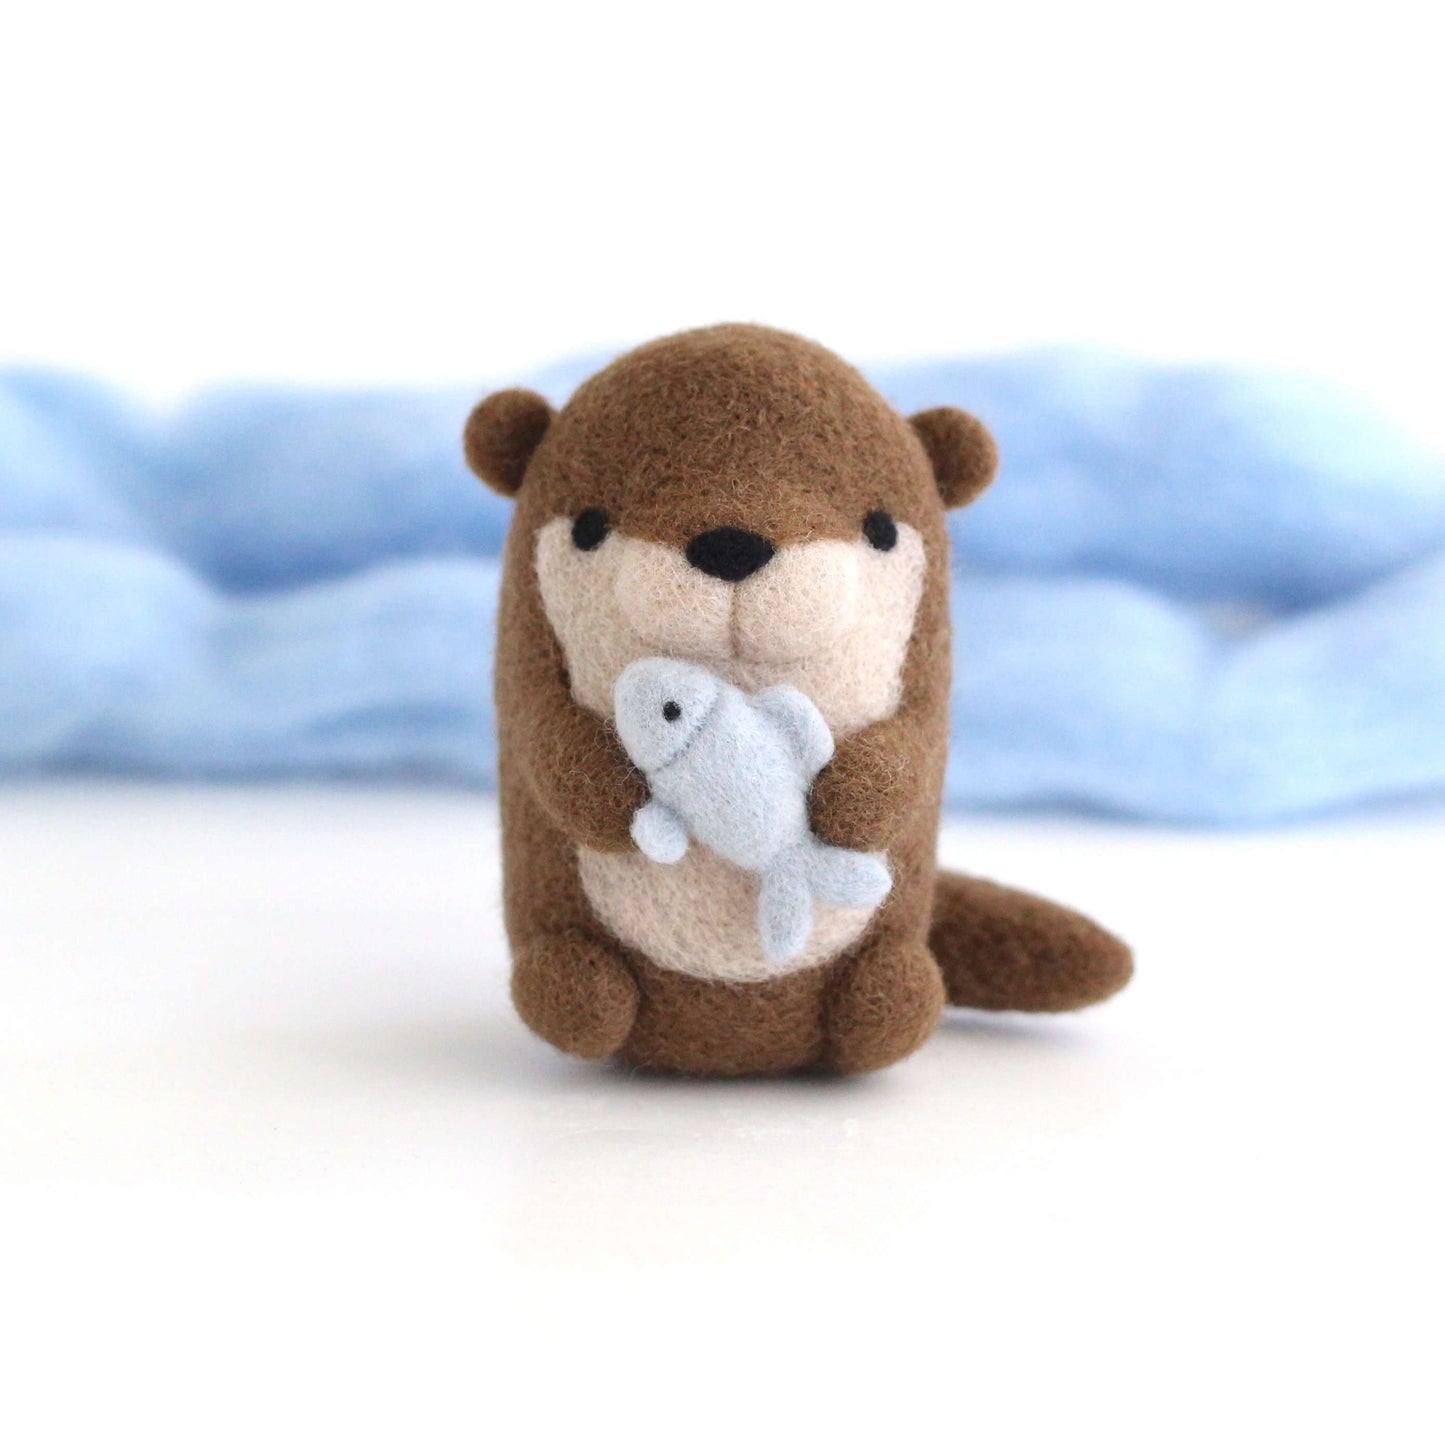 Needle Felted River Otter holding Fish by Wild Whimsy Woolies